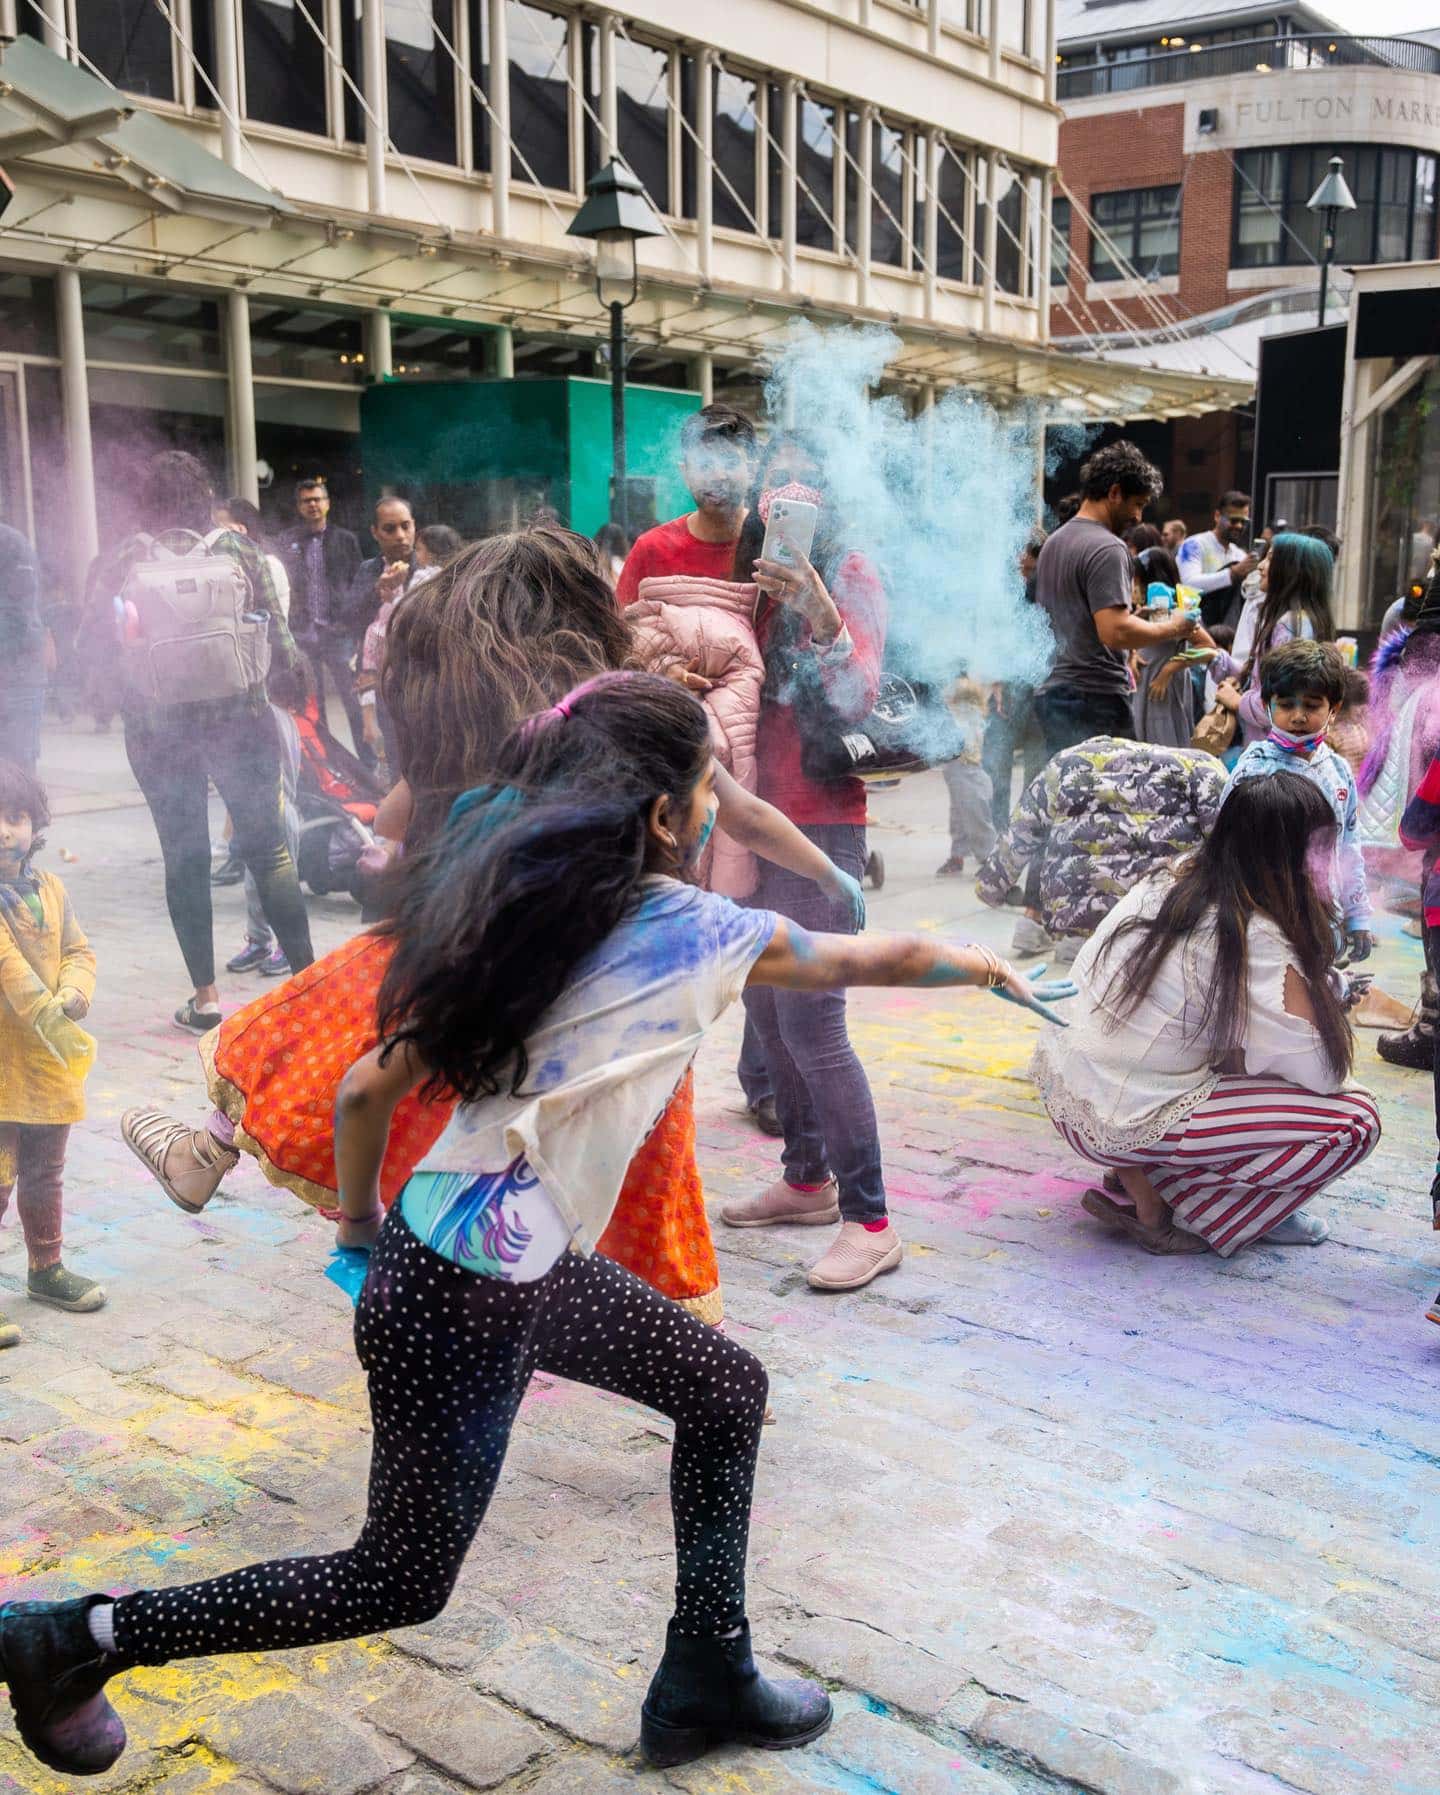 Story time. Colorful puppets. Powder play. The annual Holi celebration returns to in partnership with @theculturetree and the @seaportmuseum. Save the date!

Saturday, 3/18 | 11am–2pm
Details ➤ link in bio.